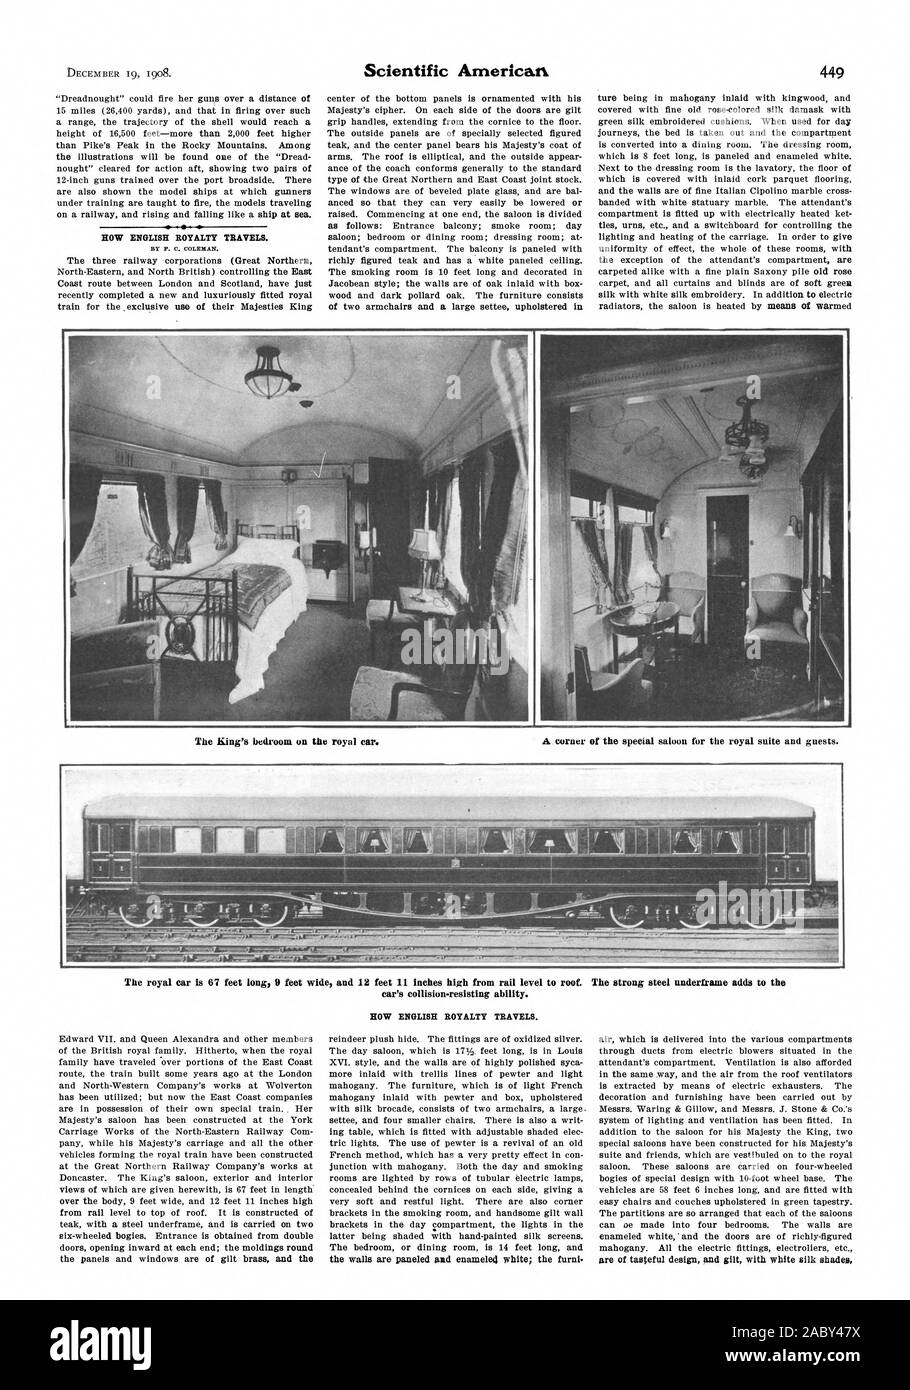 F. C. COLEMAN The royal car is 67 feet long 9 feet wide and 12 feet  inches high from rail level to roof. The strong steel underframe adds to the car's collision-resisting ability. HOW ENGLISH ROYALTY TRAVELS., scientific american, 1908-12-19 Stock Photo